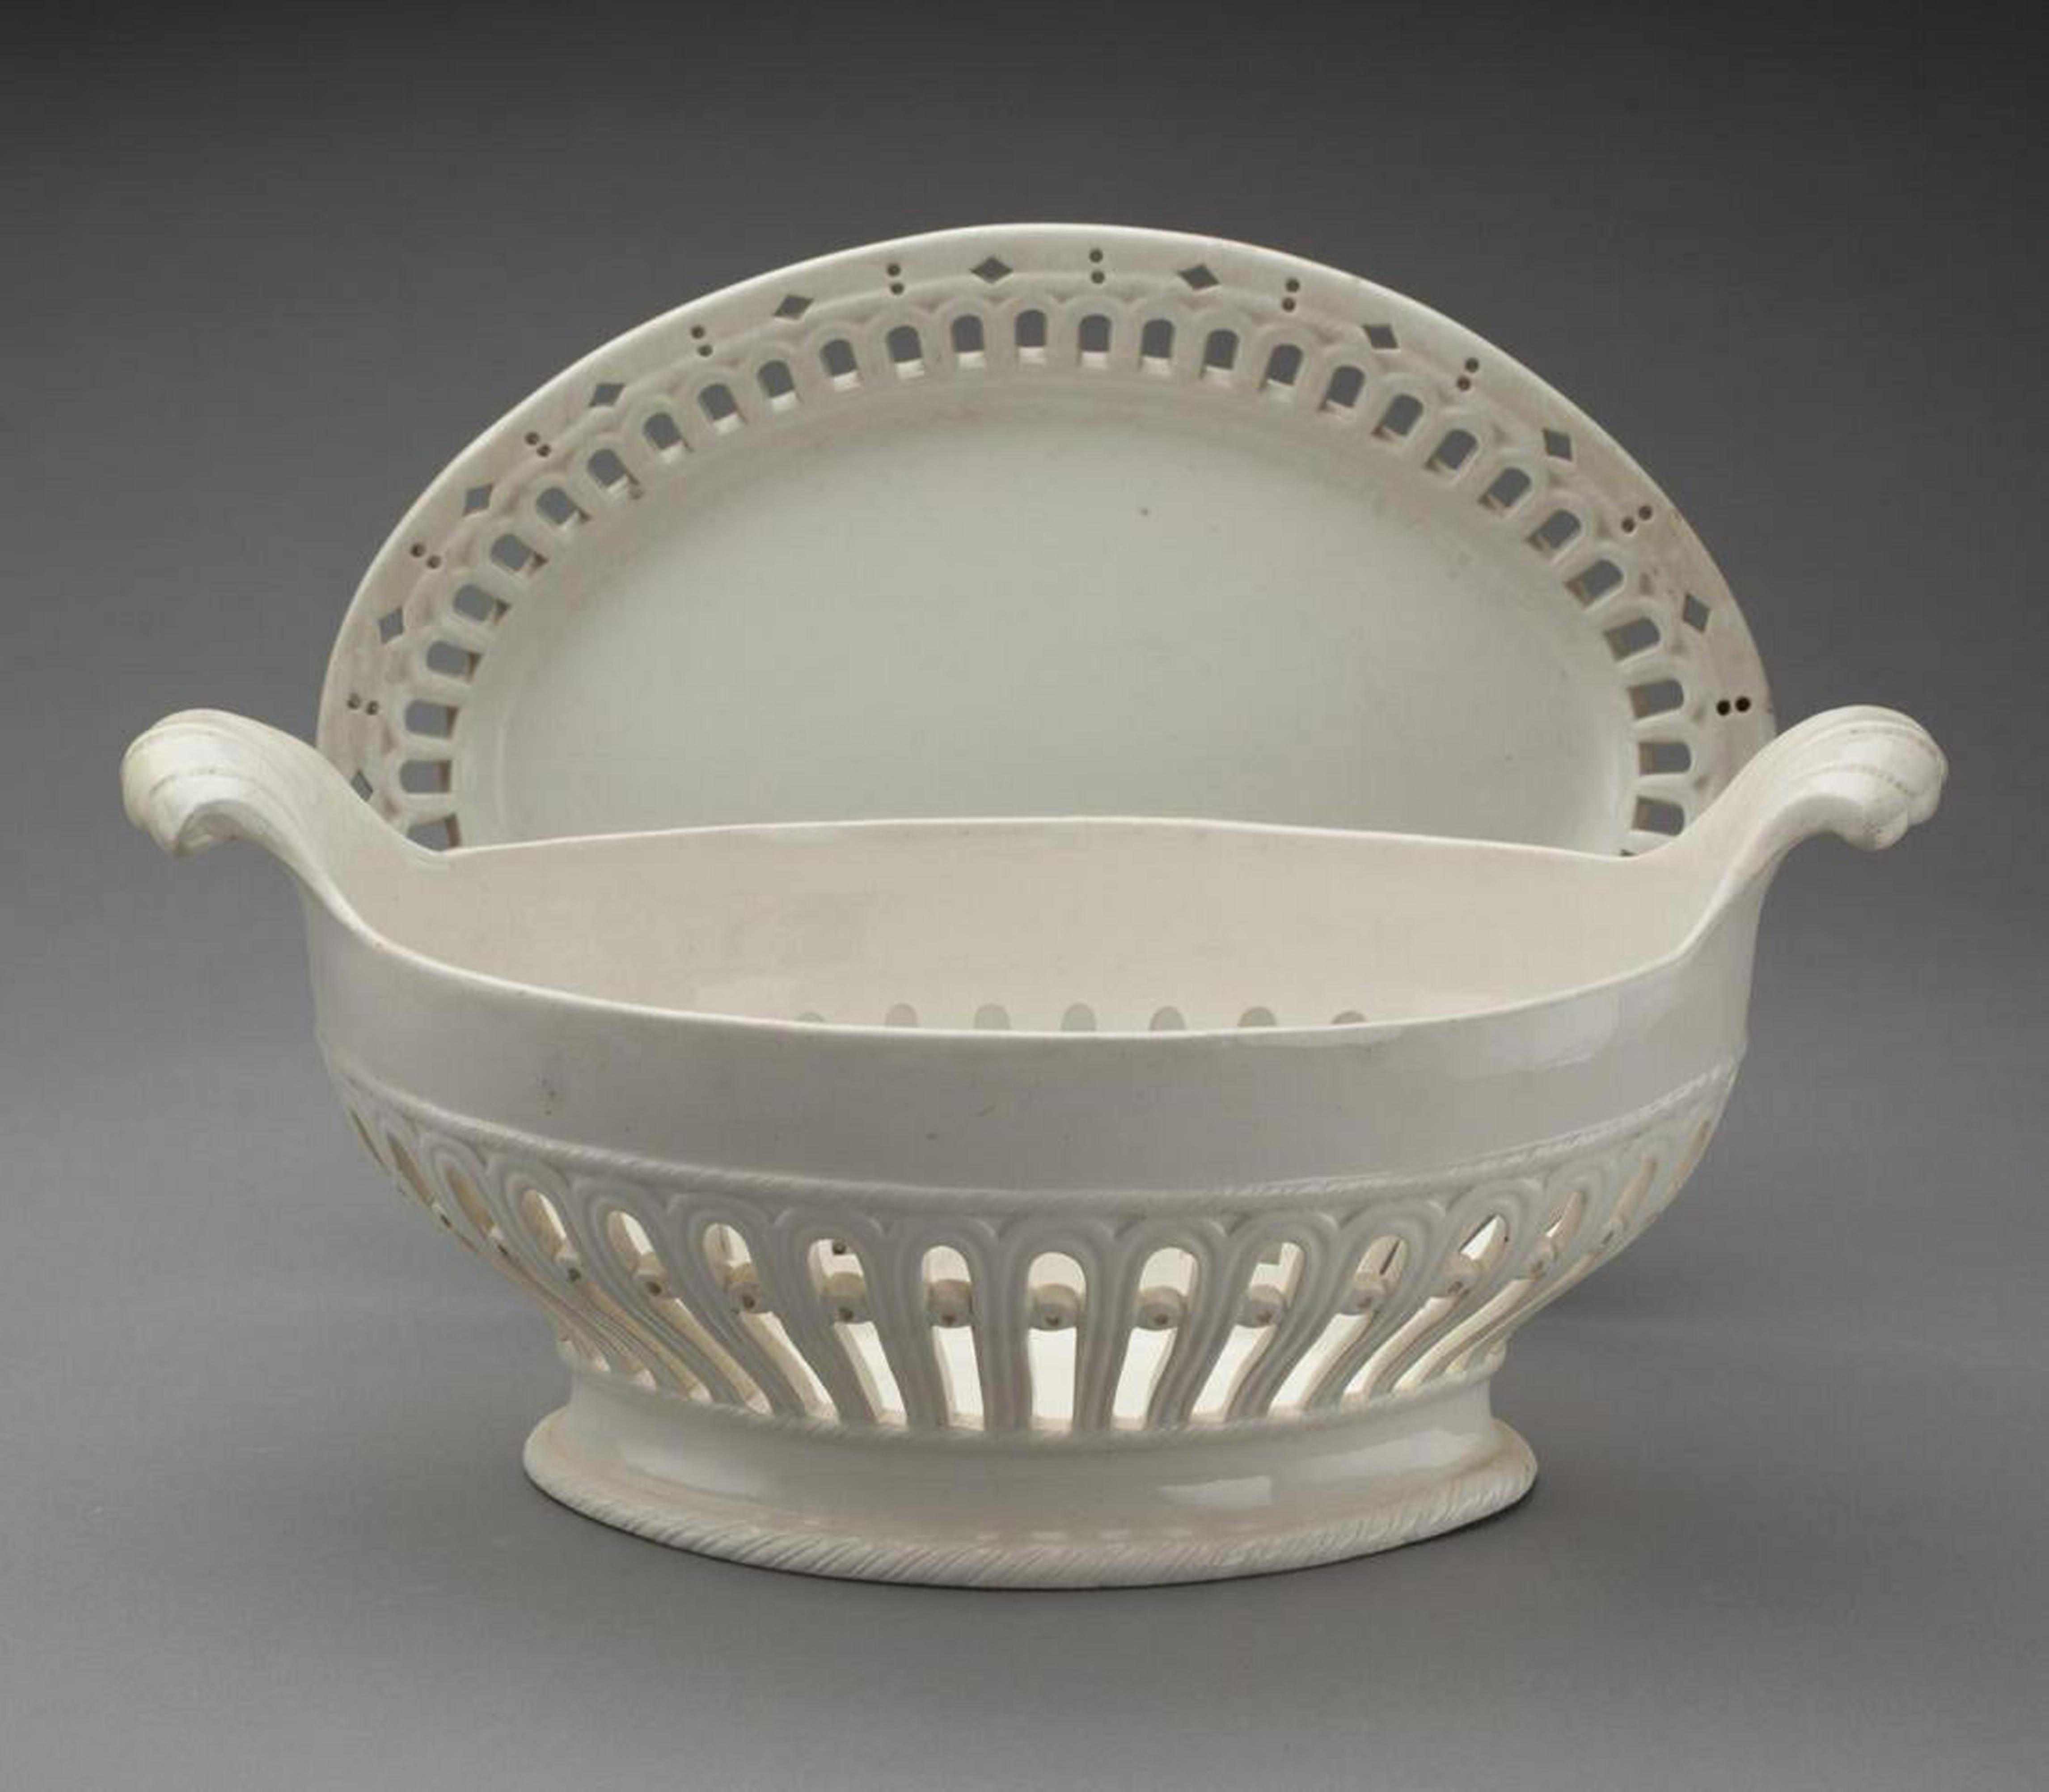 English creamware pottery fruit baskets and stands,
circa 1800


Pair of oval reticulated pearlware fruit baskets with scroll handles and reticulated stands.

Dimensions: Overall- 5 inches high x 10 1/4 inches x 7 1/2 inches wide, stand 7 1/2